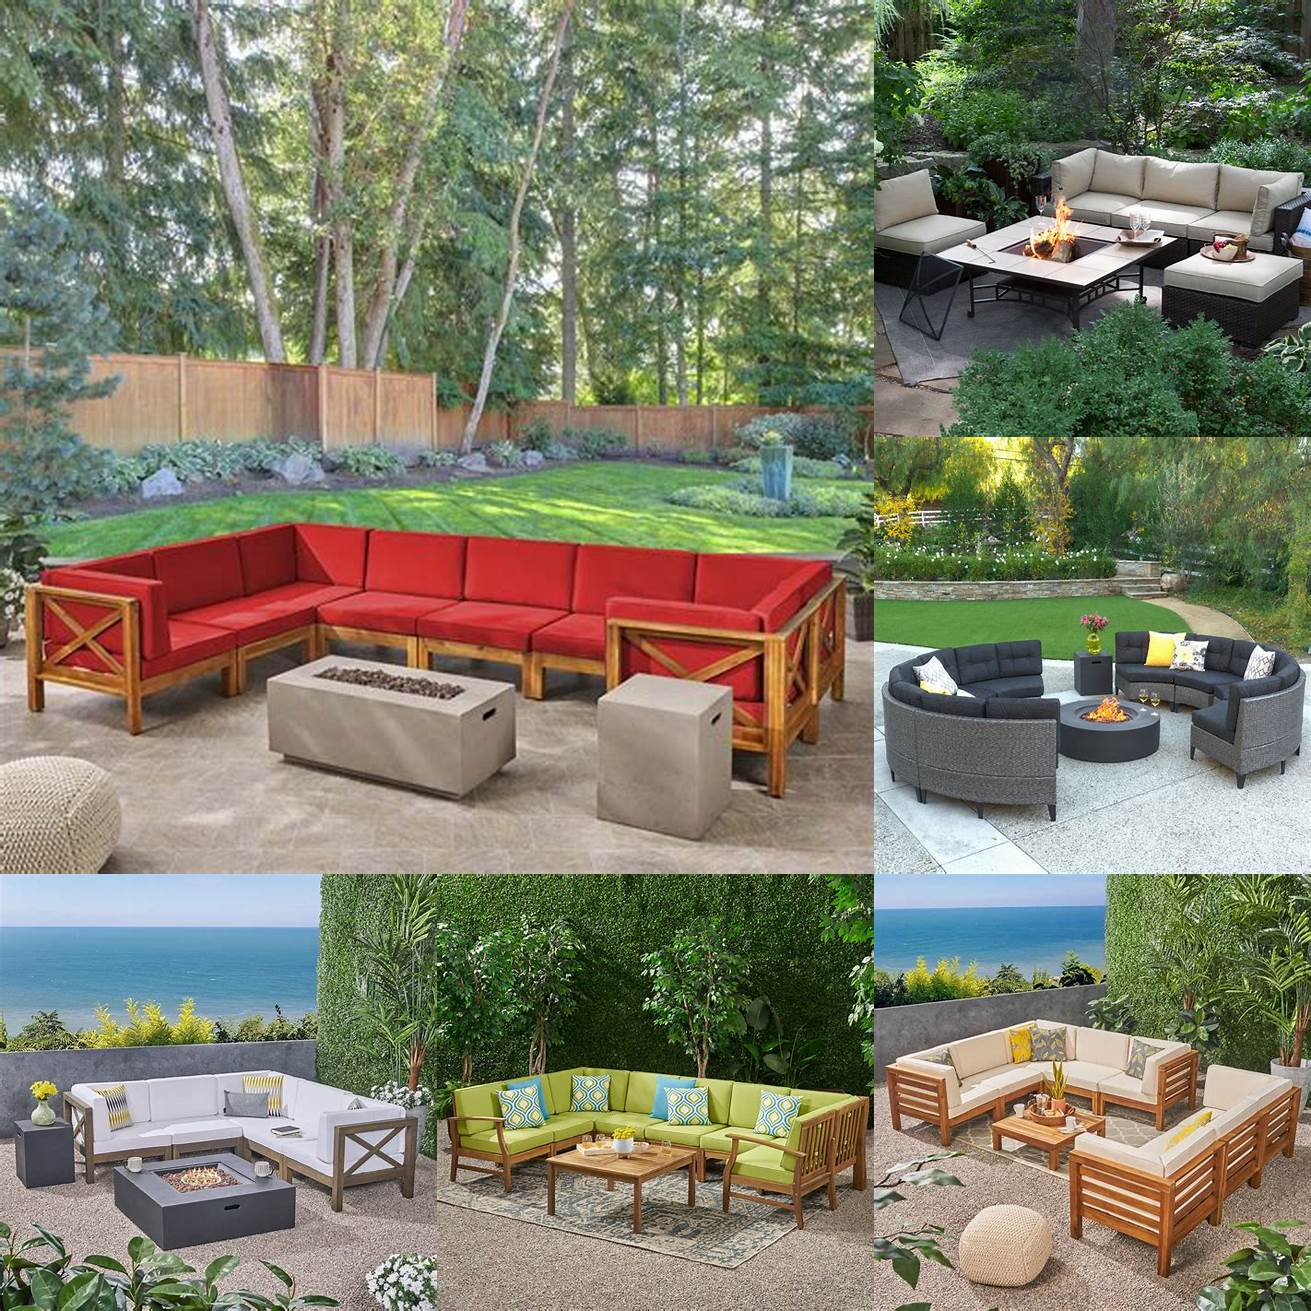 Teak Outdoor Furniture Huge Sectional with Fire Pit